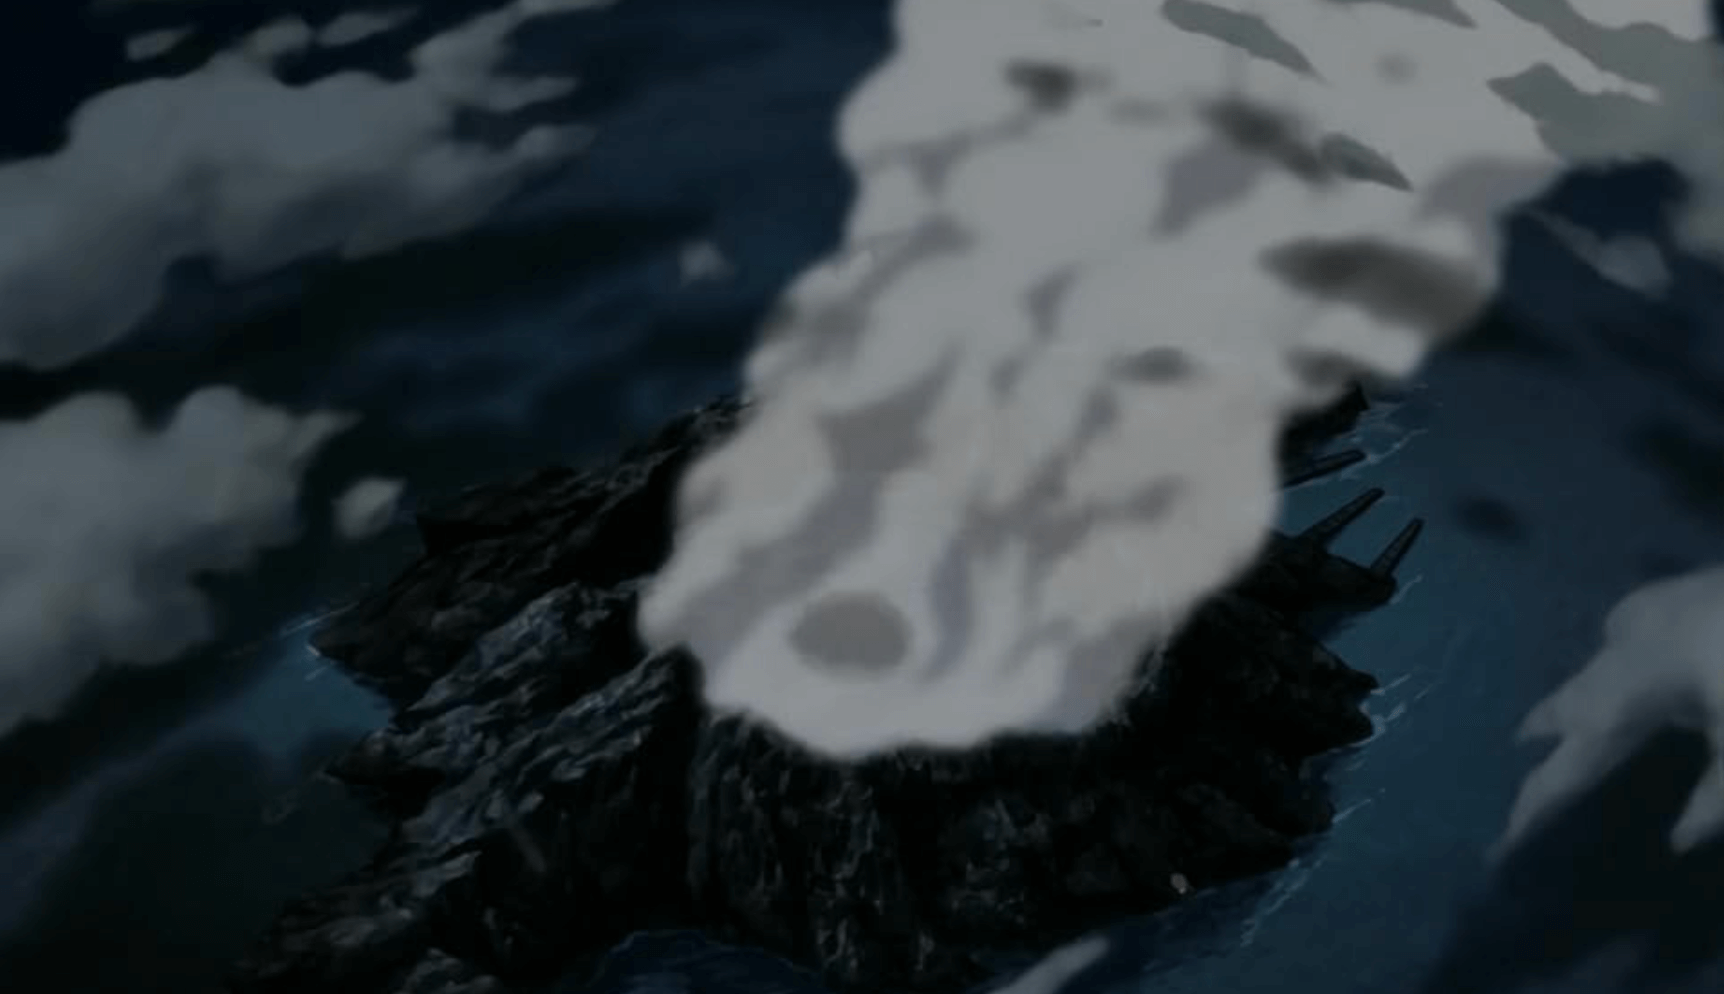 The Boiling Rock in Avatar: The Last Airbender